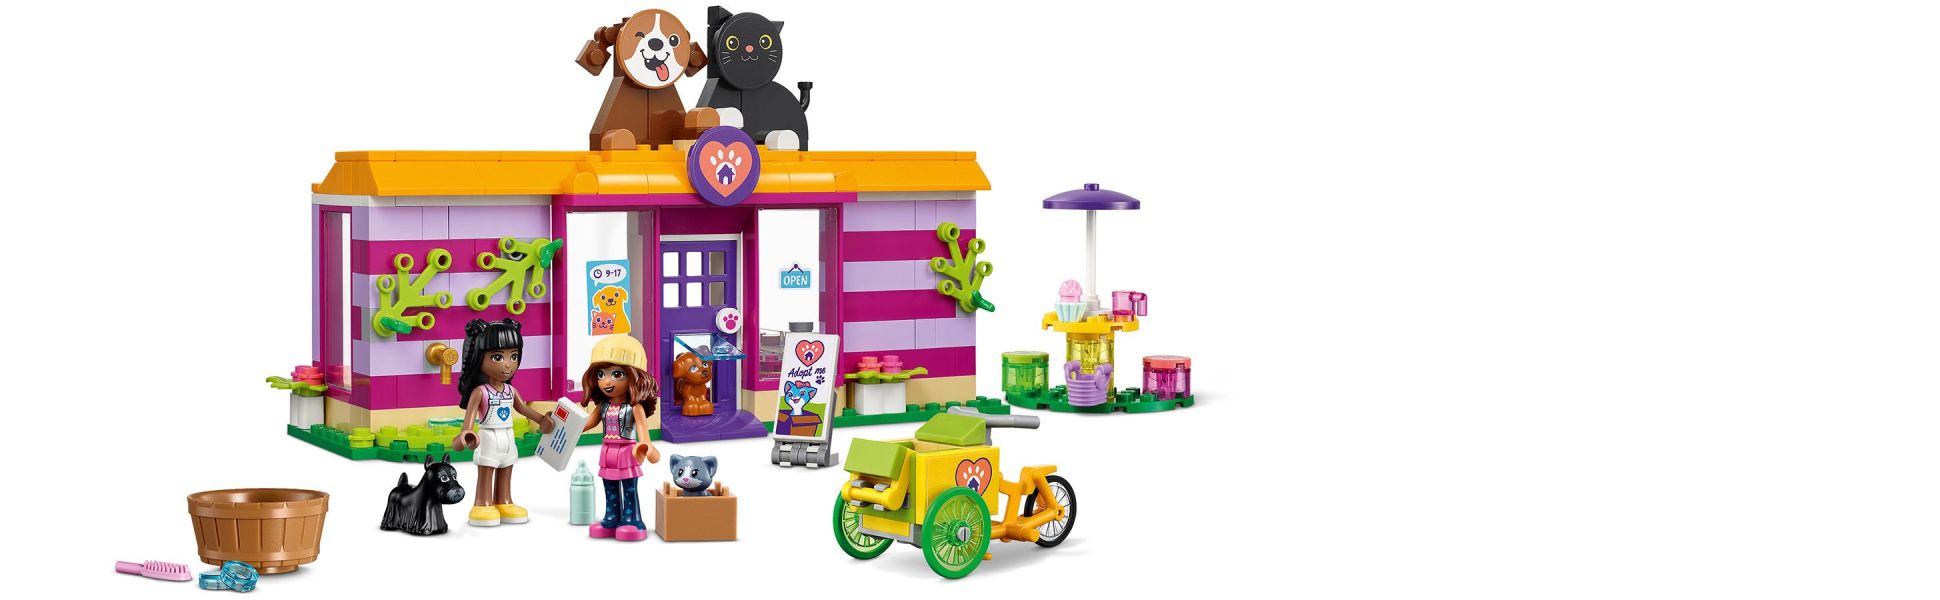 Pet Animal LEGO Dog & with Ages Olivia Priyanka Toy - Collectible Boys, Rescue Café 41699 6+ & Cat Kids Building Friends Girls, Figures, and Mini-Dolls, Creative Set Toys for Adoption